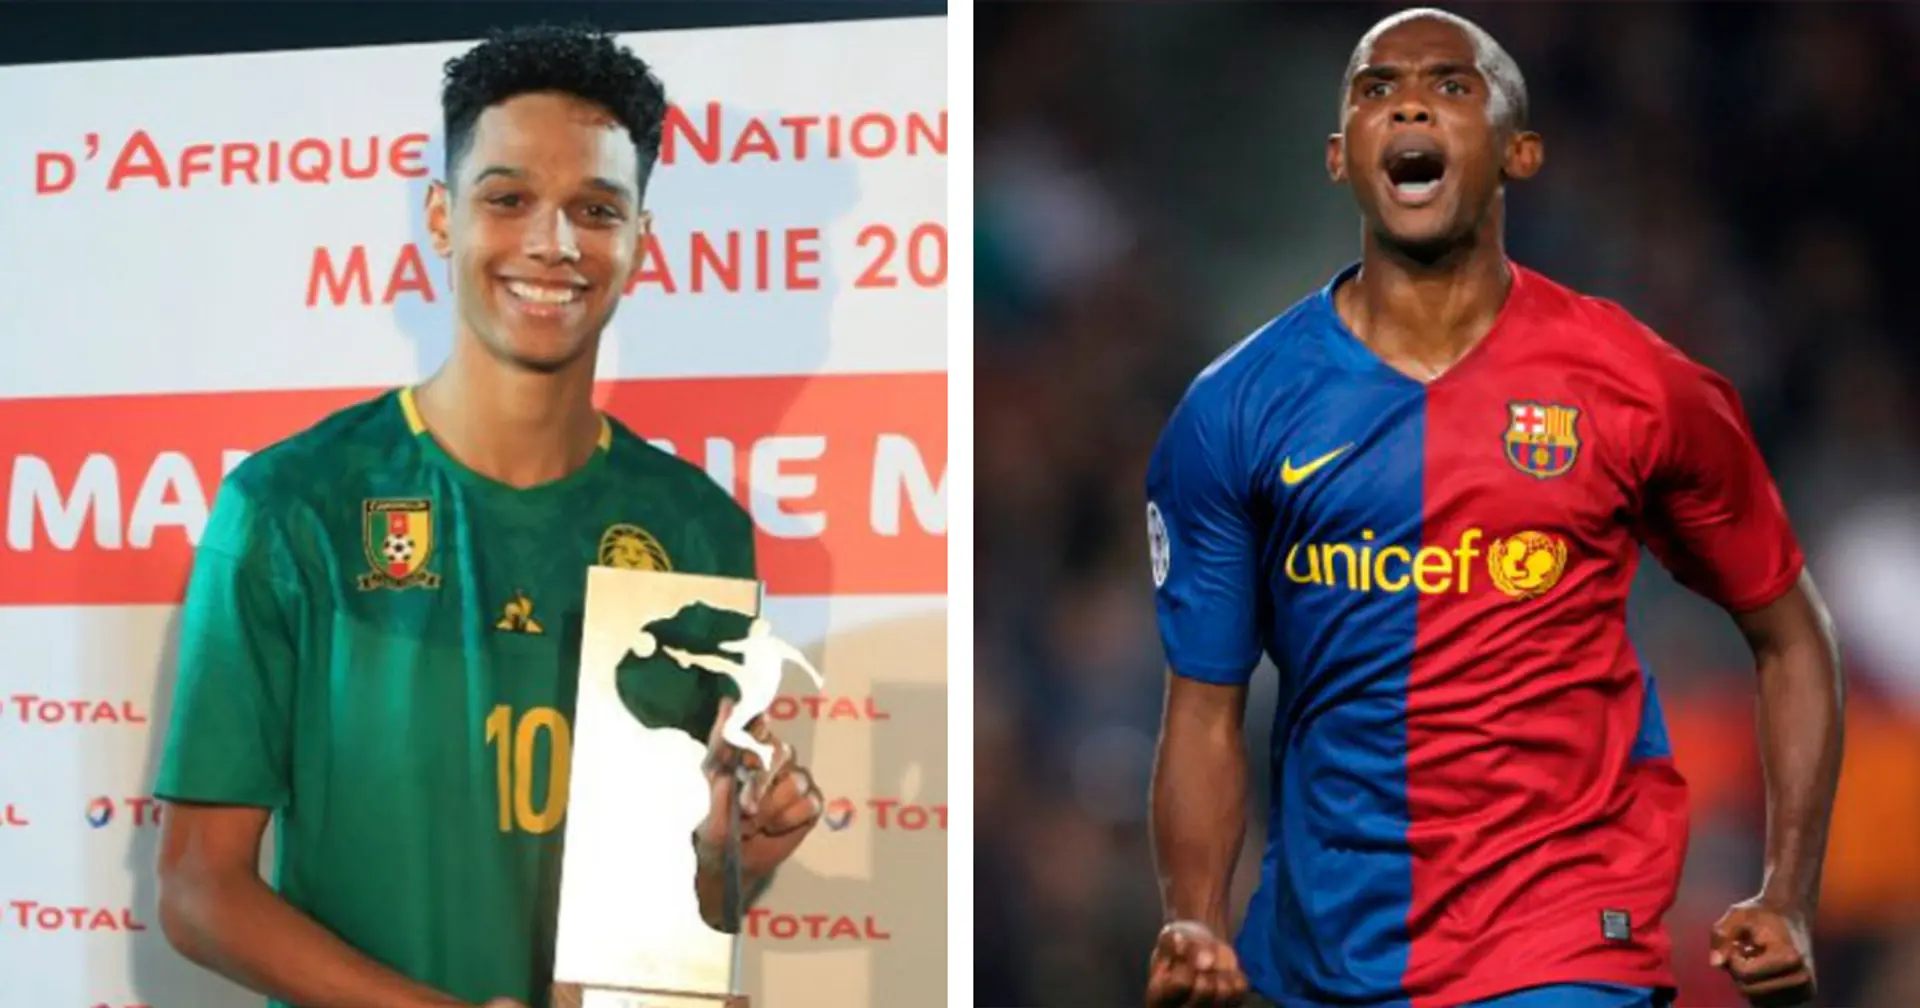 18-year-old Etienne Eto'o scores 2 goals in U20 African Cup of Nations game, wins MOTM prize